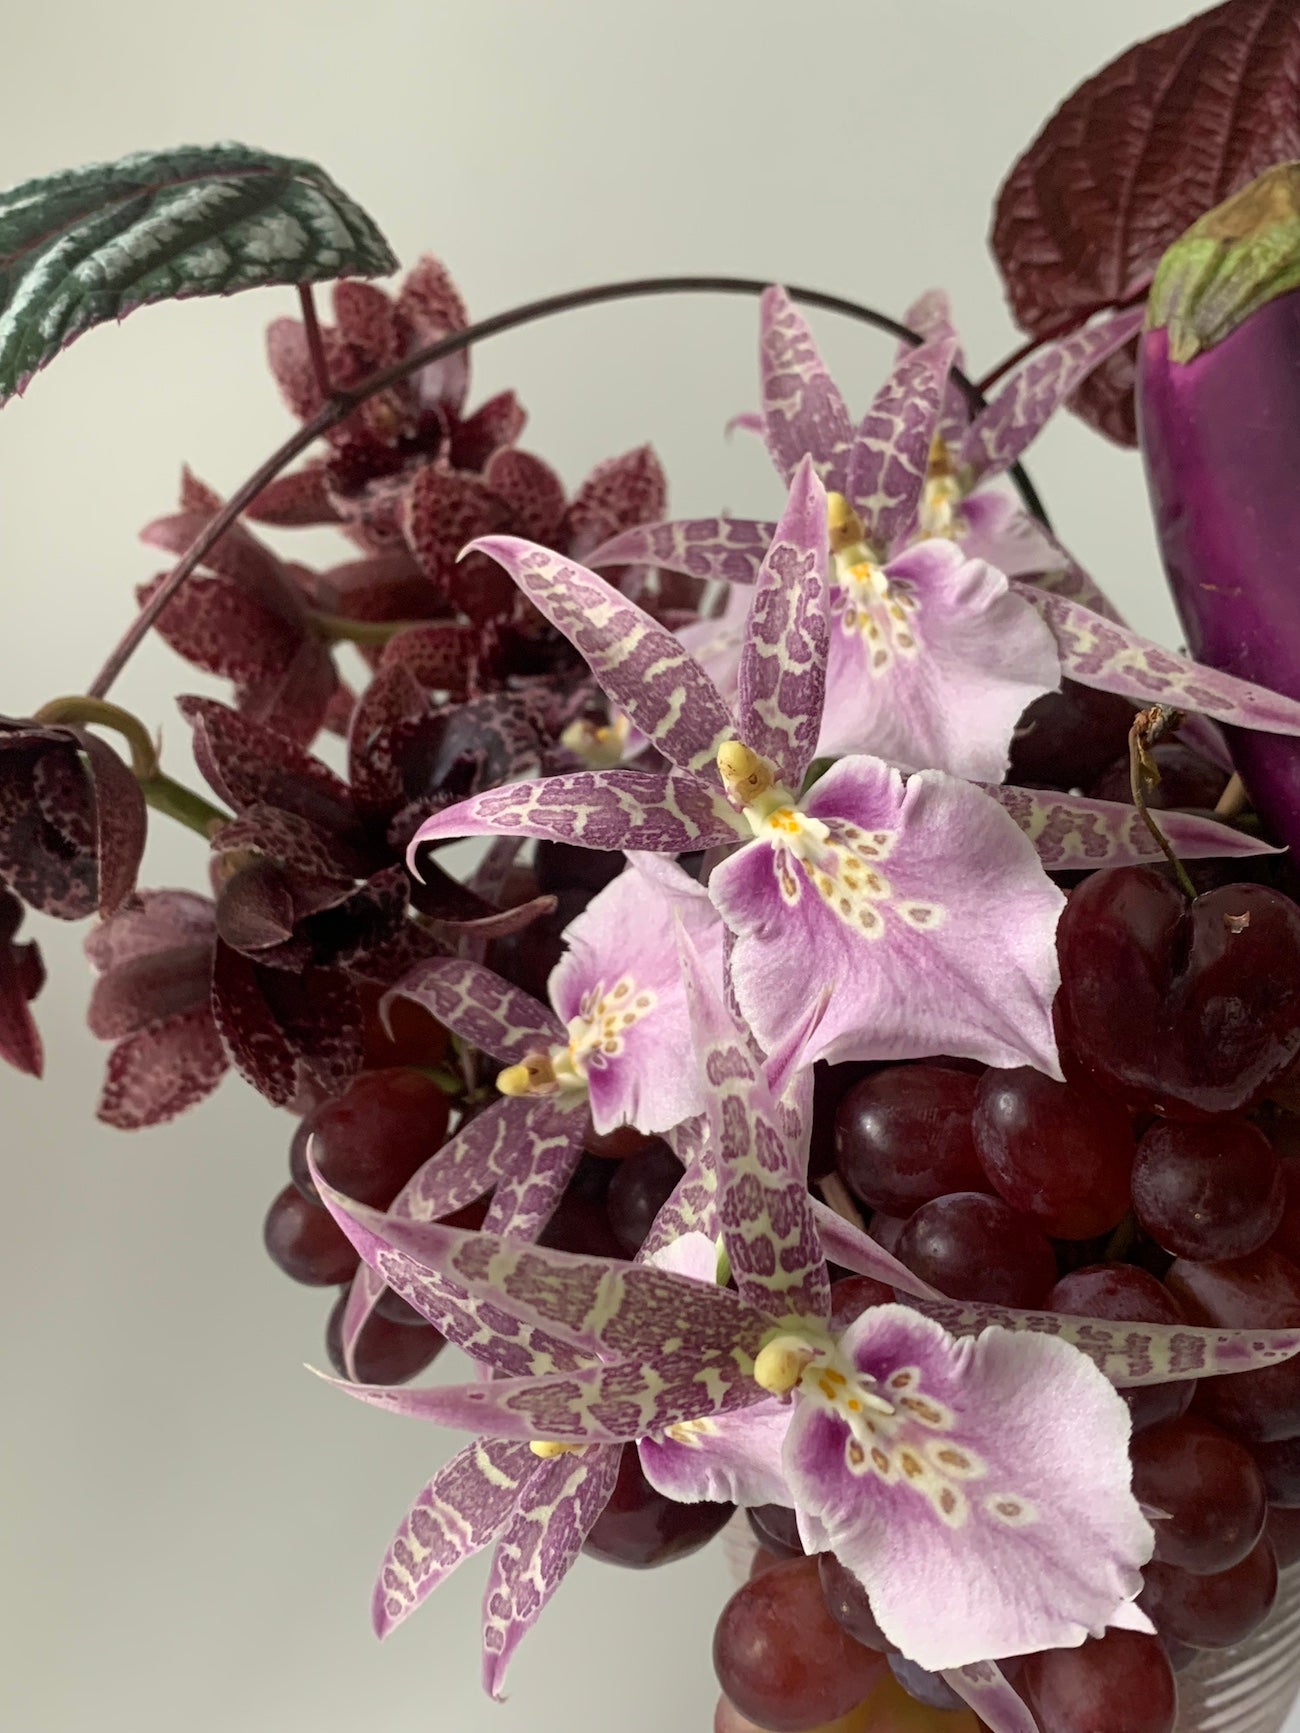 A TAKAYASATO.COM custom arrangement of purple orchids and grapes in a vase.